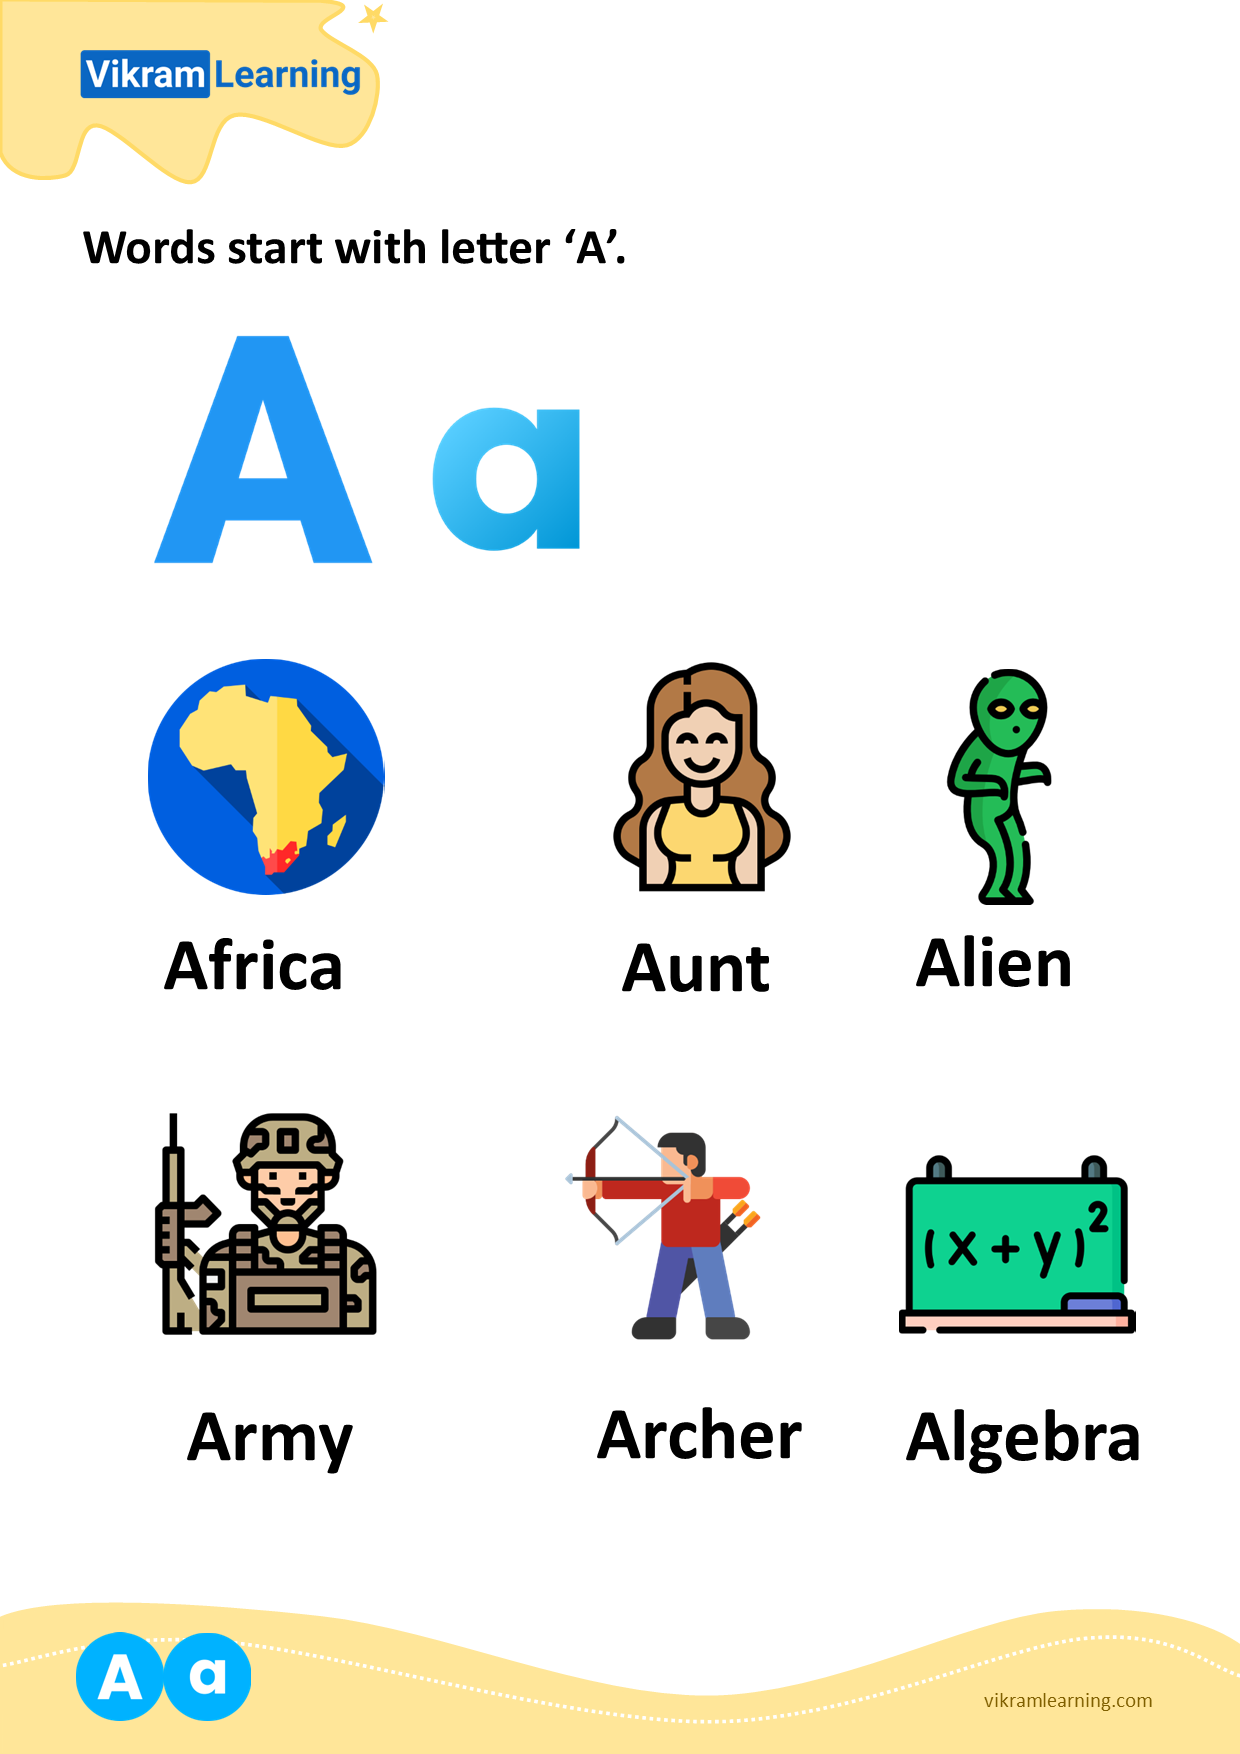 Download words start with letter 'a' worksheets